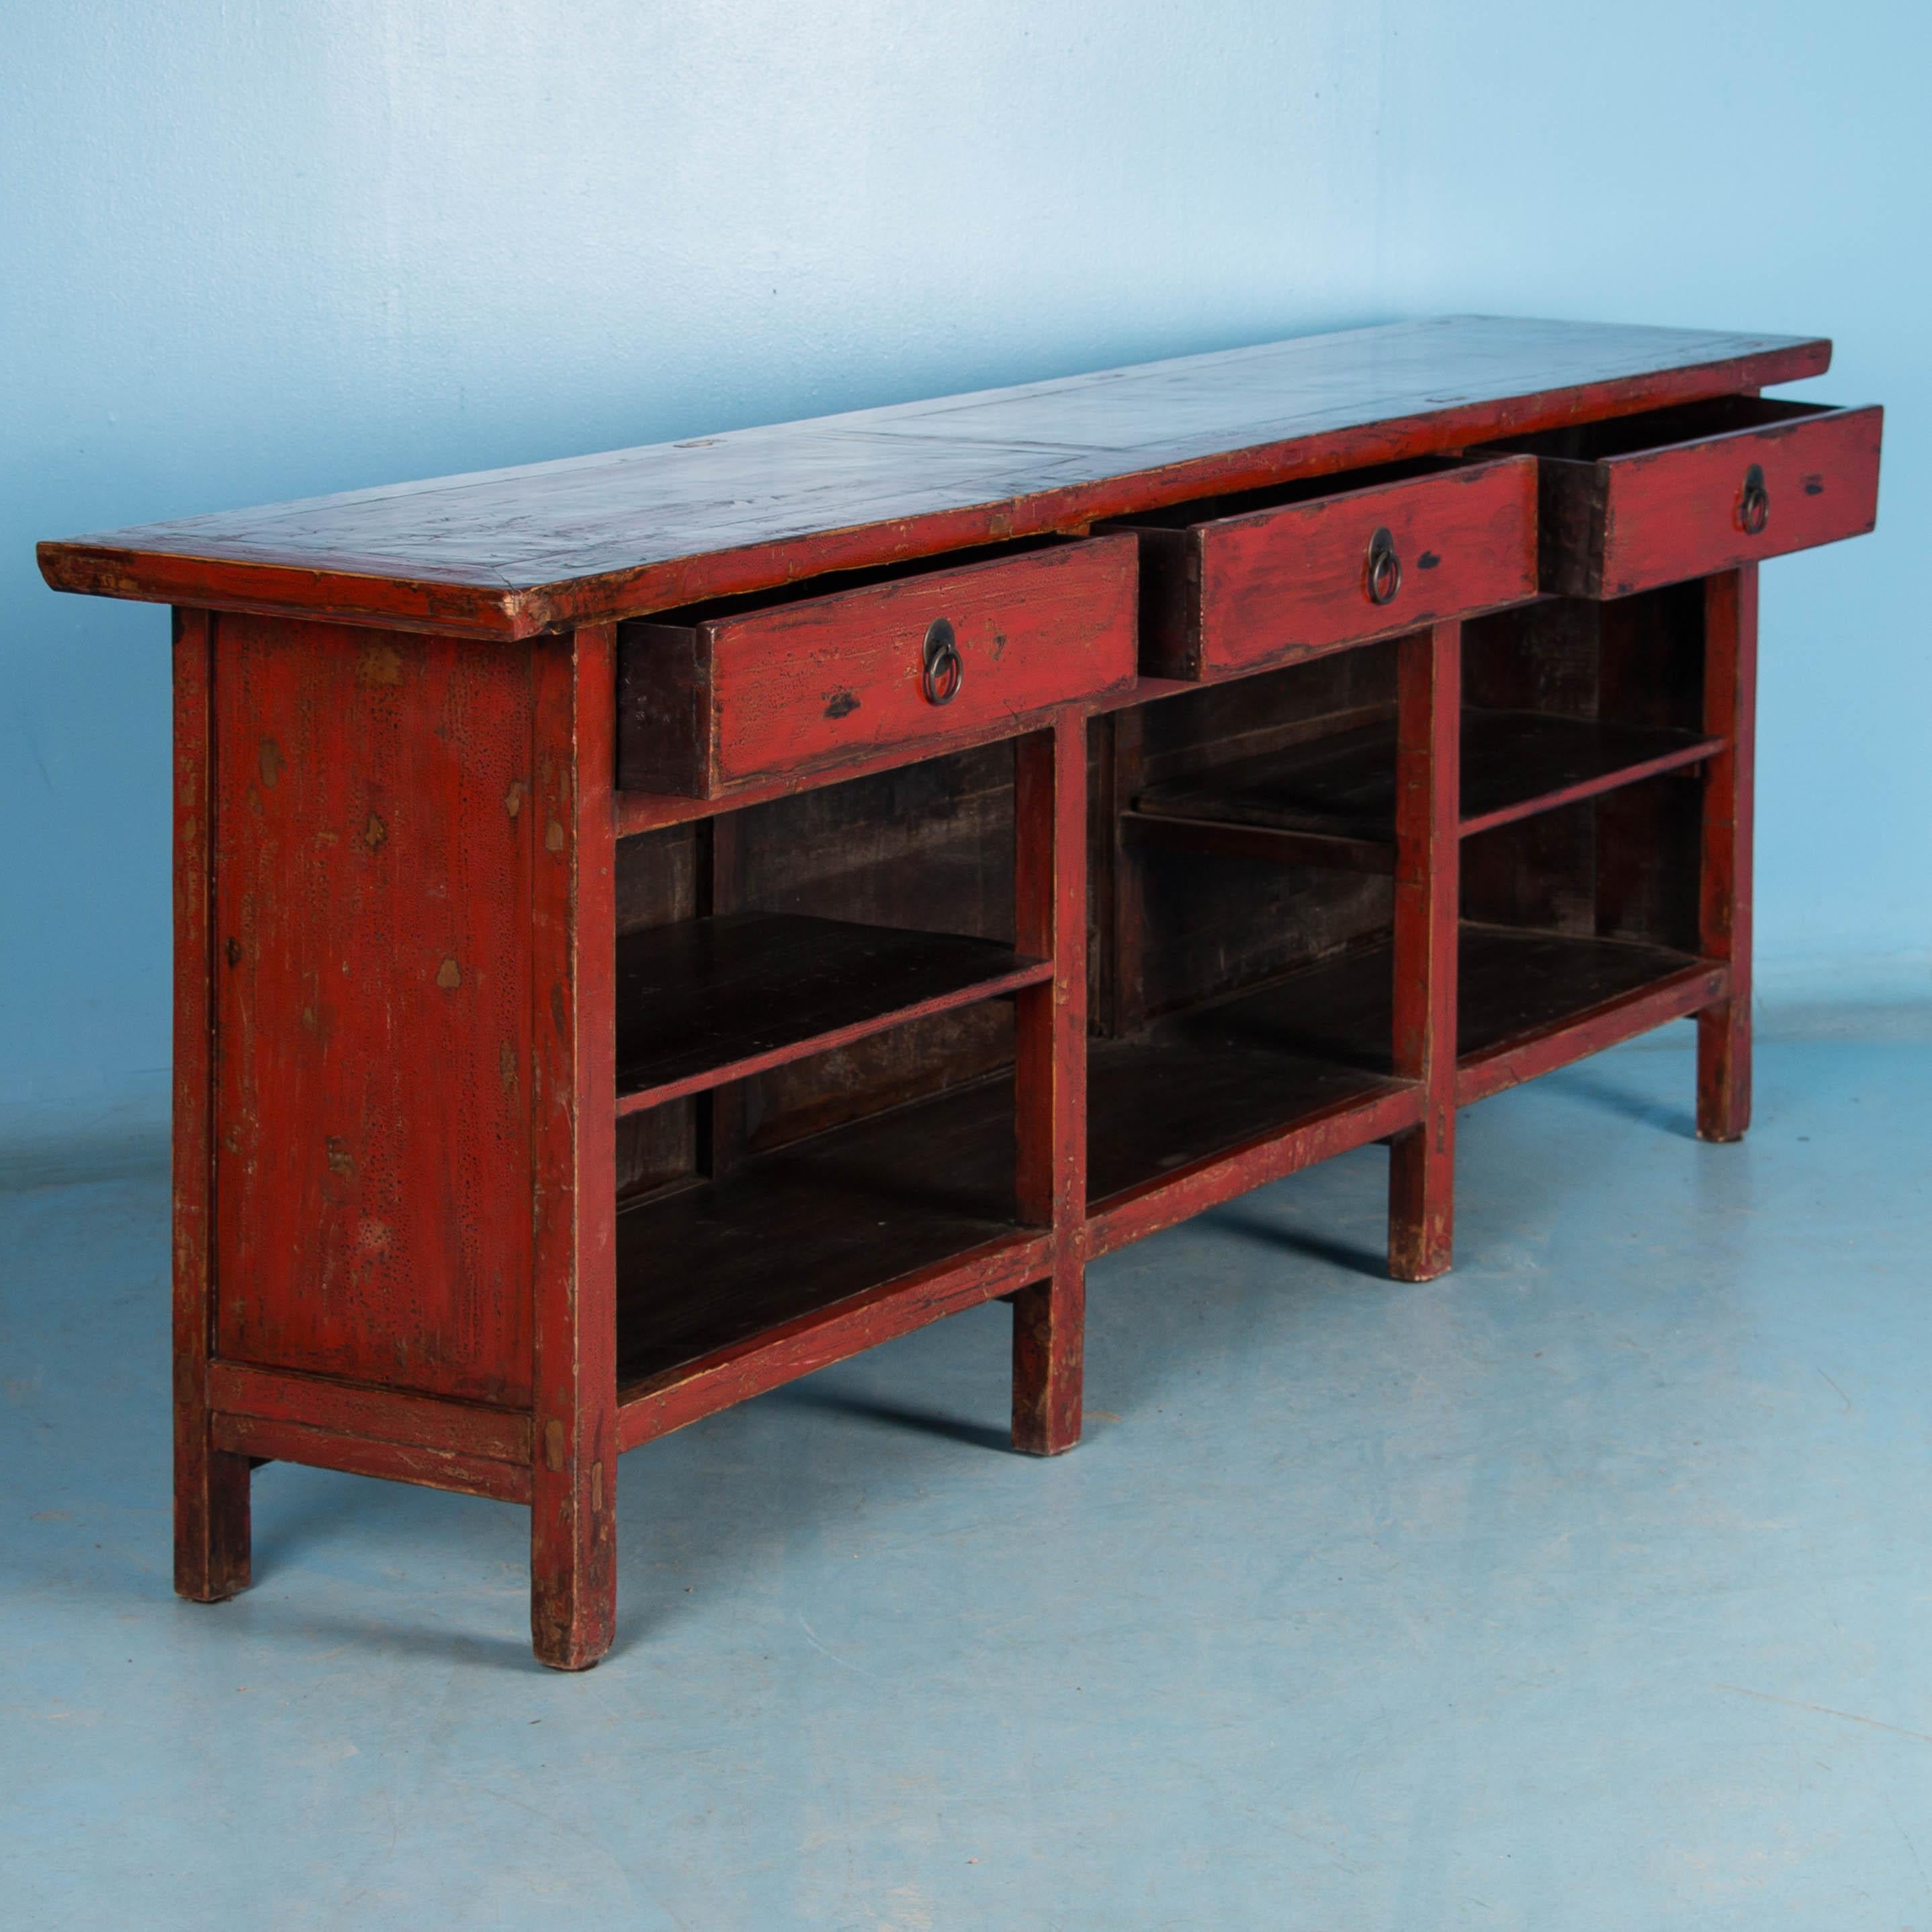 The highly polished lacquered finish gives this cabinet a sleek look and brings out the depth of the red paint. This long sideboard with three drawers and open shelving below is also painted inside the drawers and shelves and finished on all four